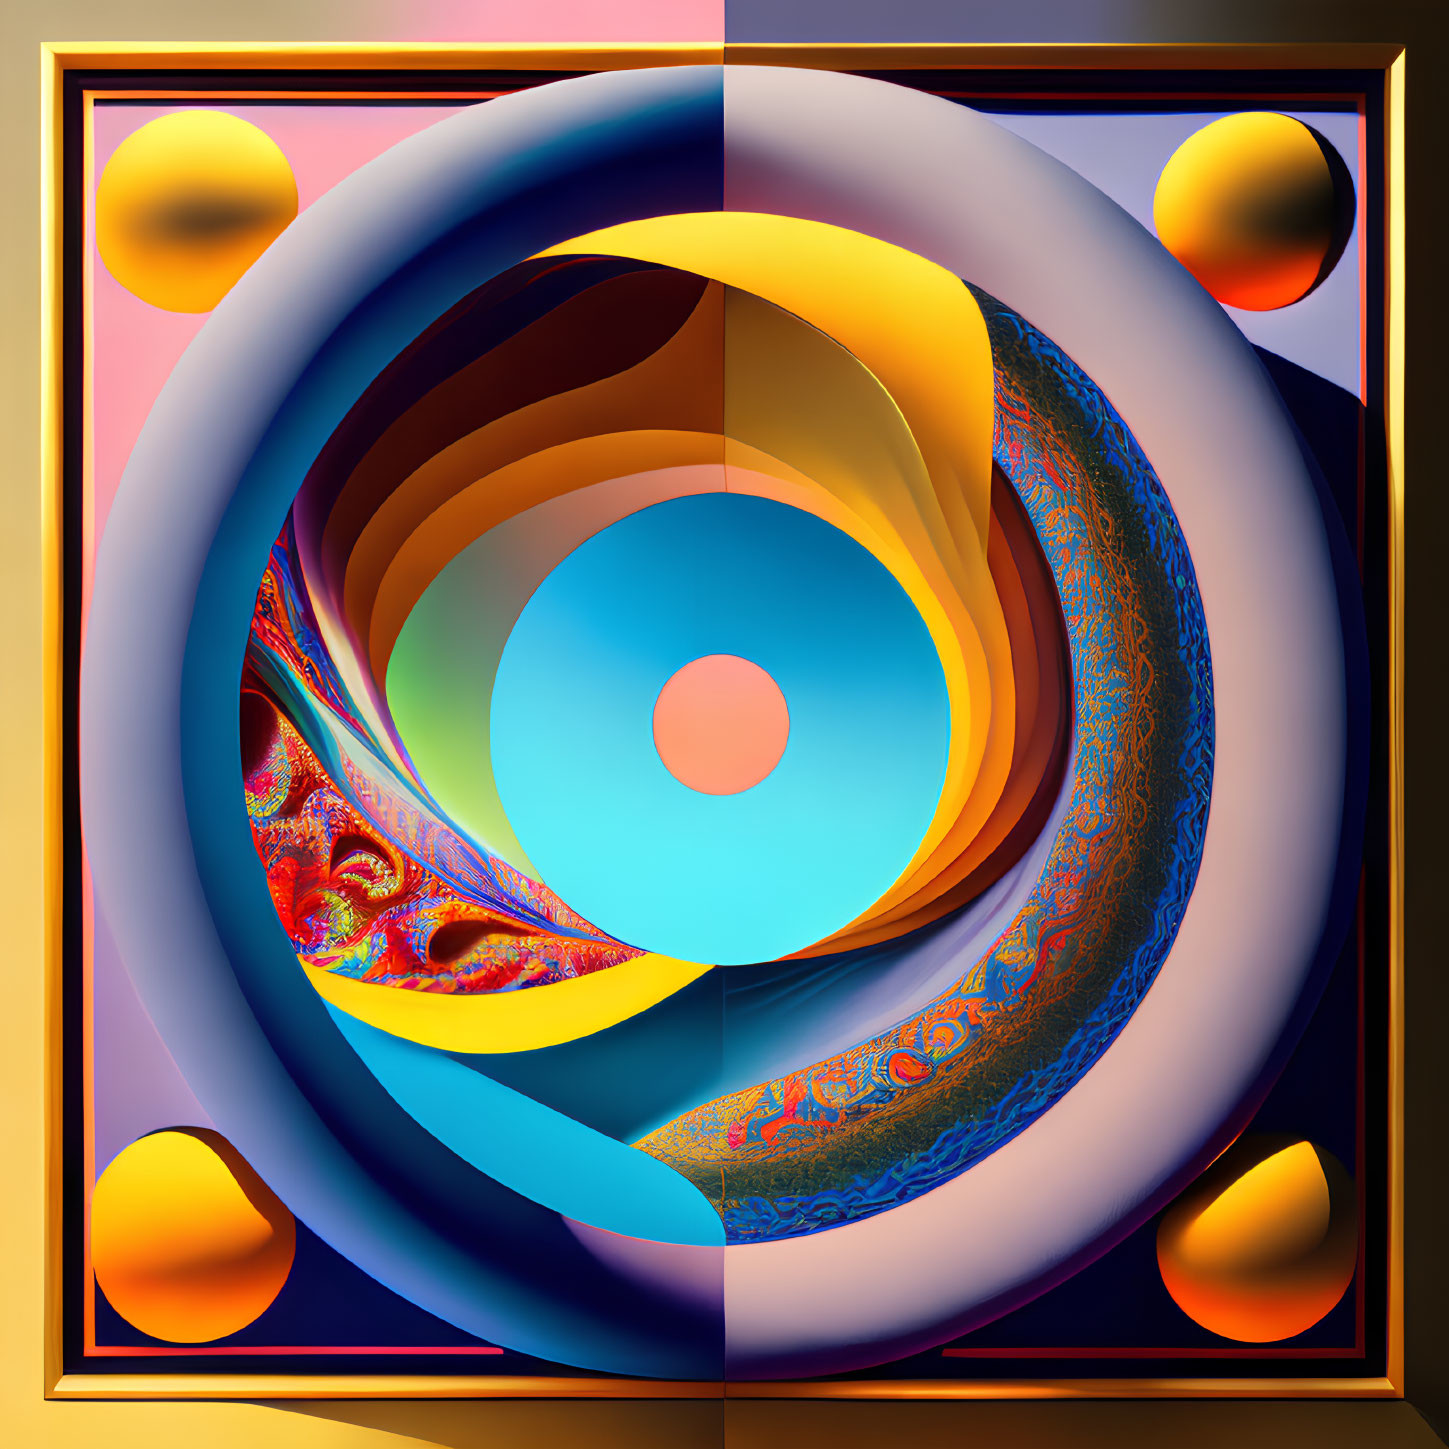 Vivid Abstract Digital Artwork with Concentric Circles and Geometric Frame